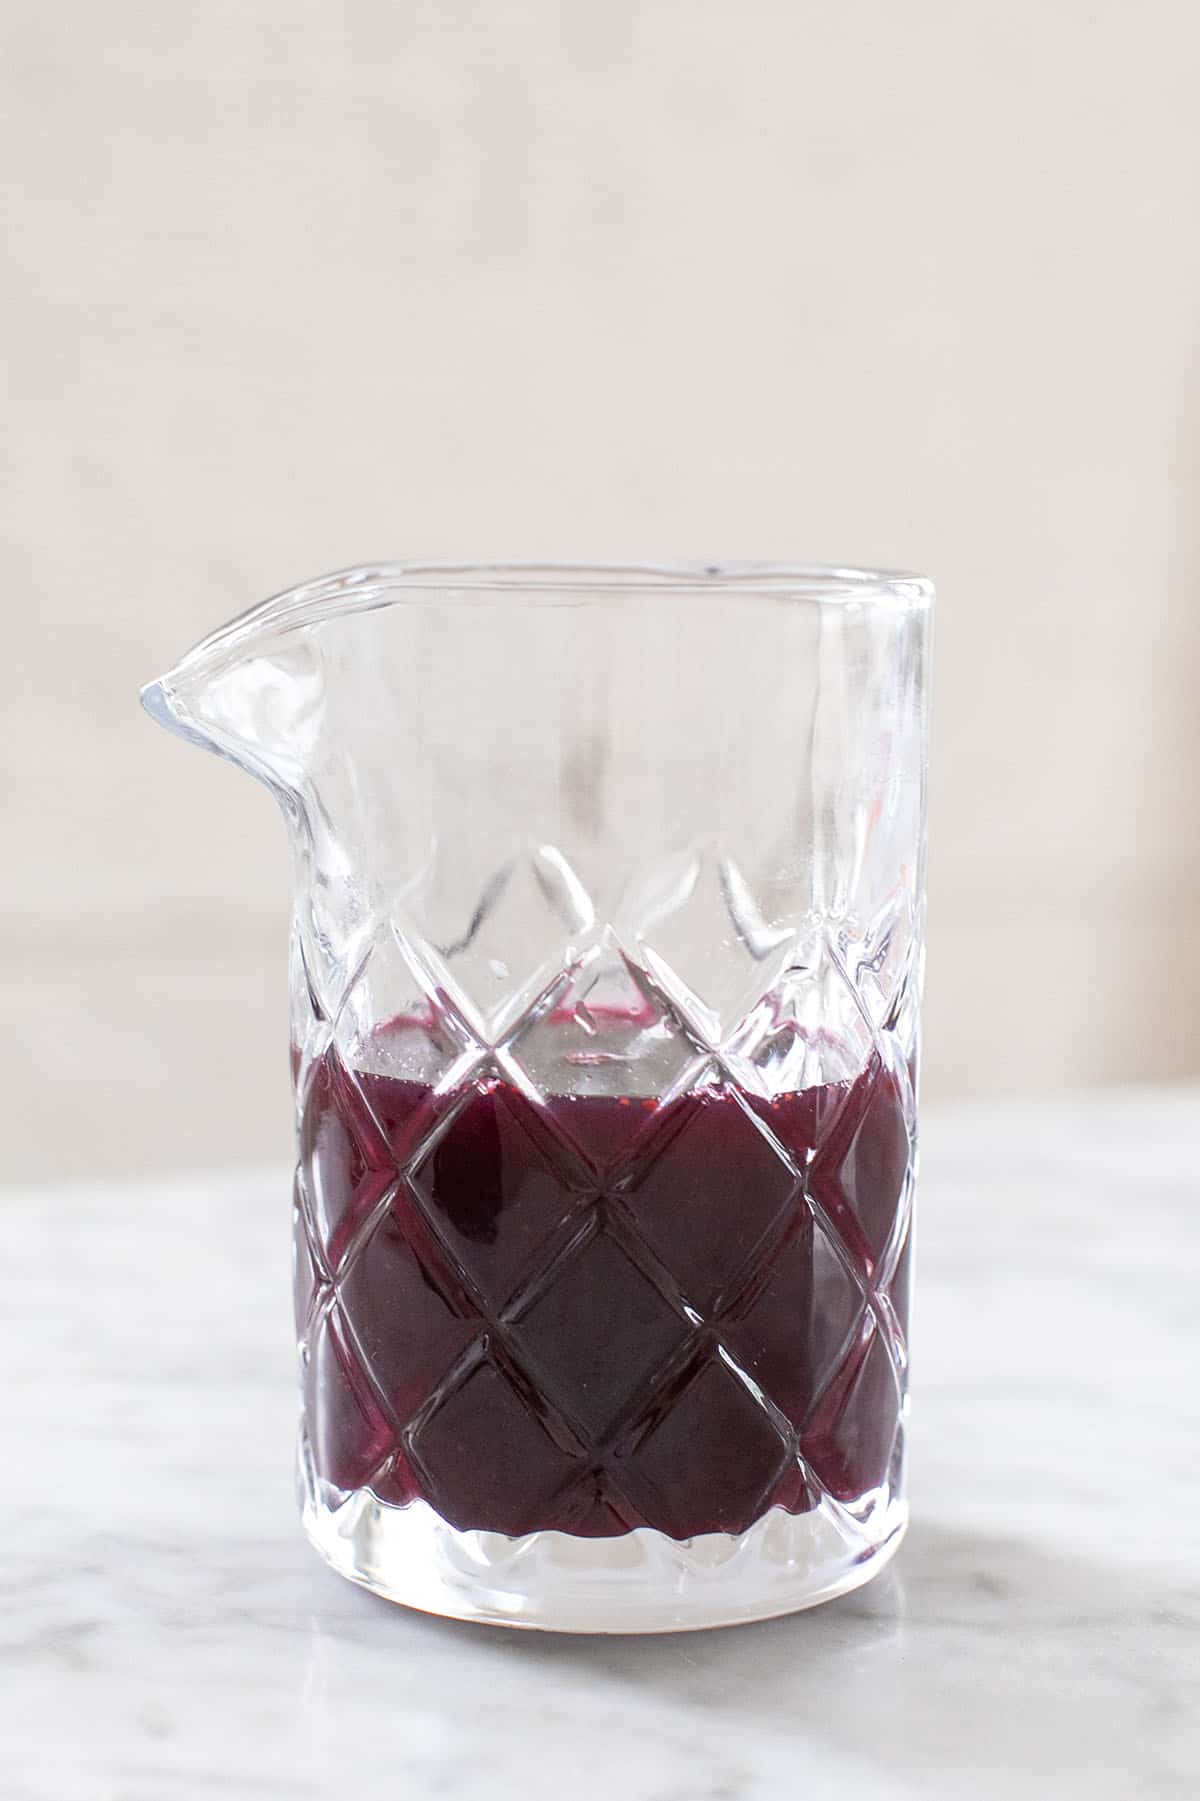 Blueberry simple syrup in a glass jar.